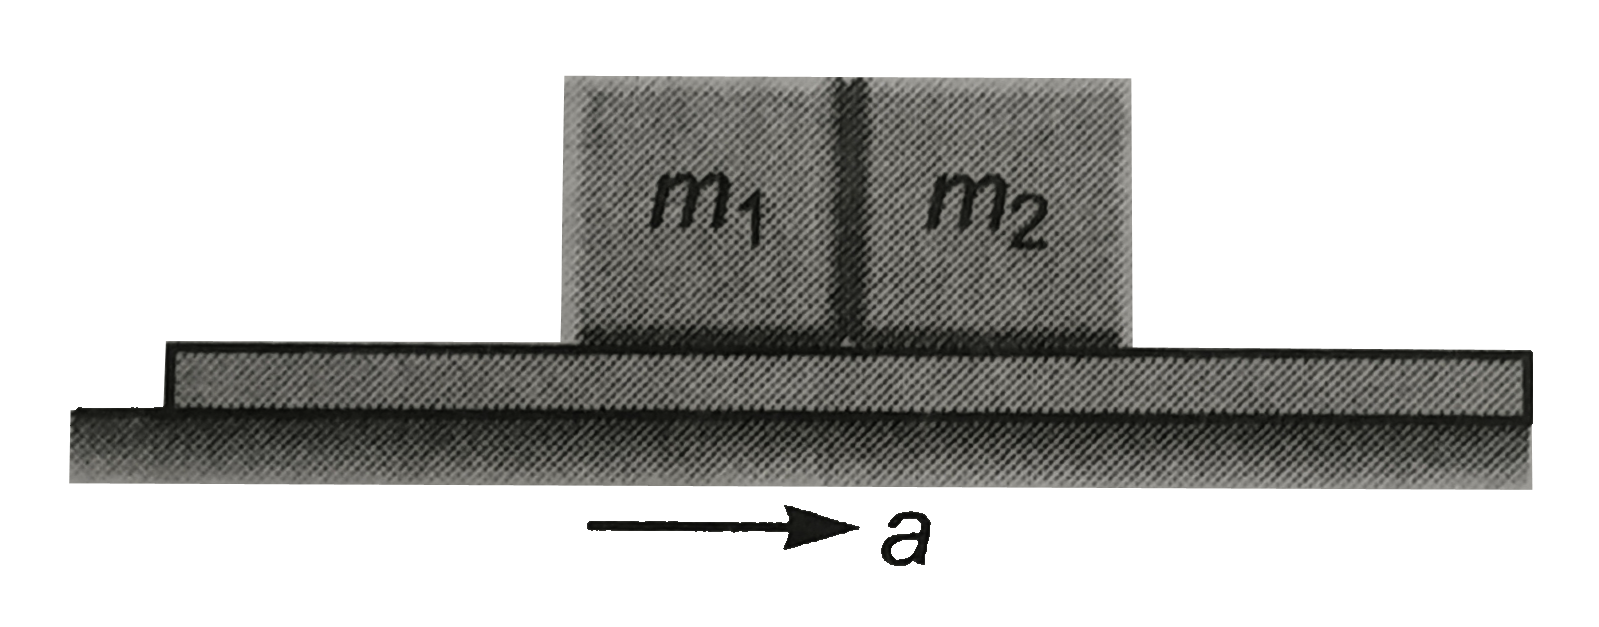 Two blocks of masses m(1) and m(2) are placed in contact with each other on a horizontal platform as shown in figure The coefficent of friction between m(1) and platform is 2mu and that between block m(2) and platform is mu.The platform moves with an acceleration a . The normal reation between the blocks is